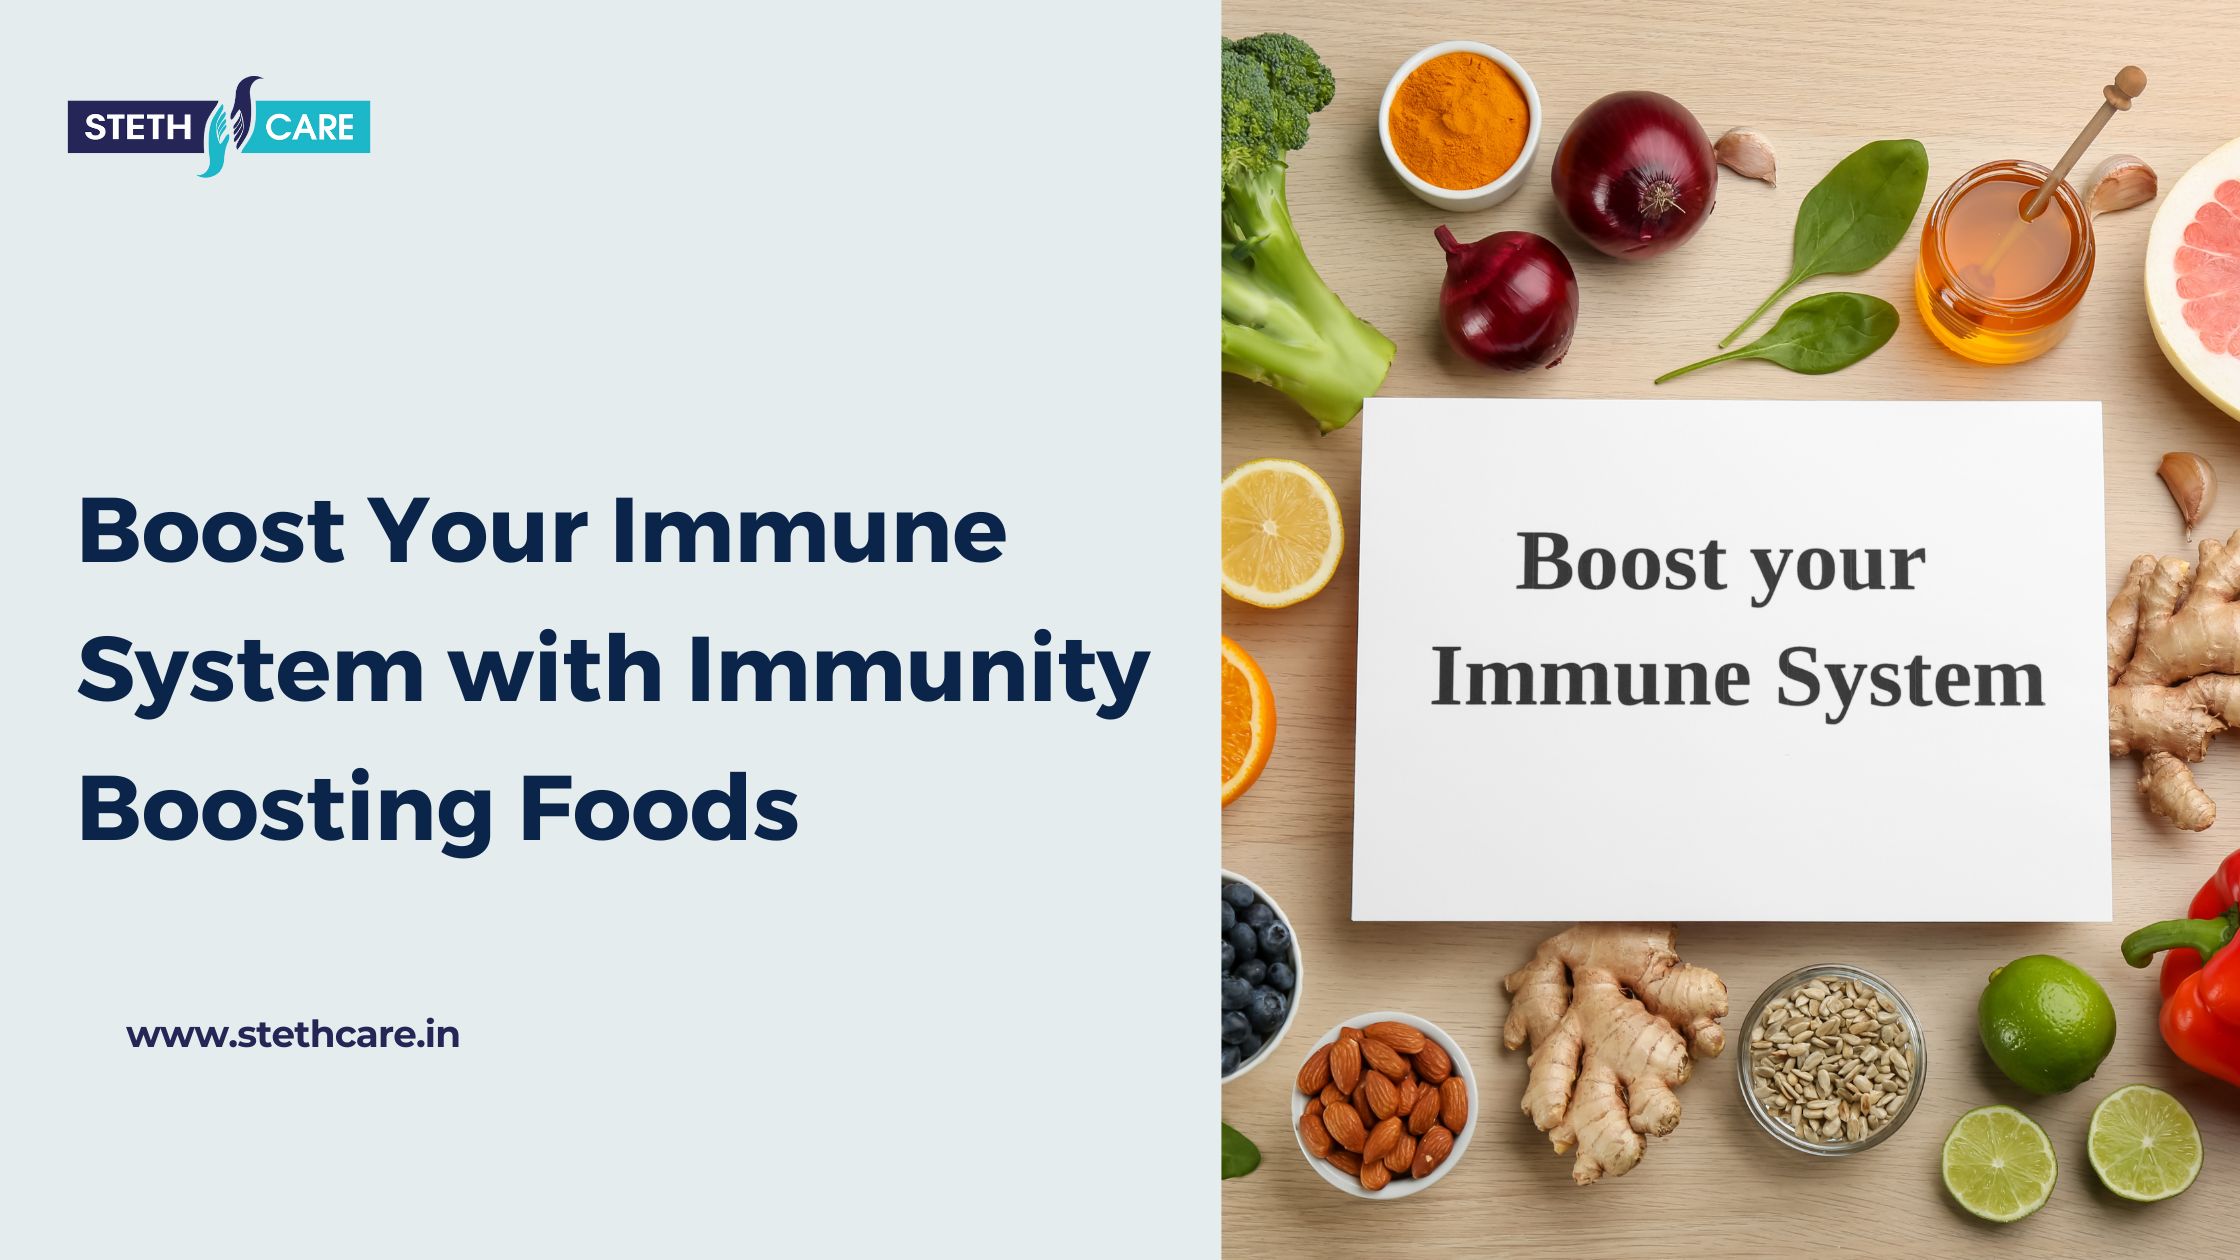 Boost Your Immune System with Immunity Boosting Foods